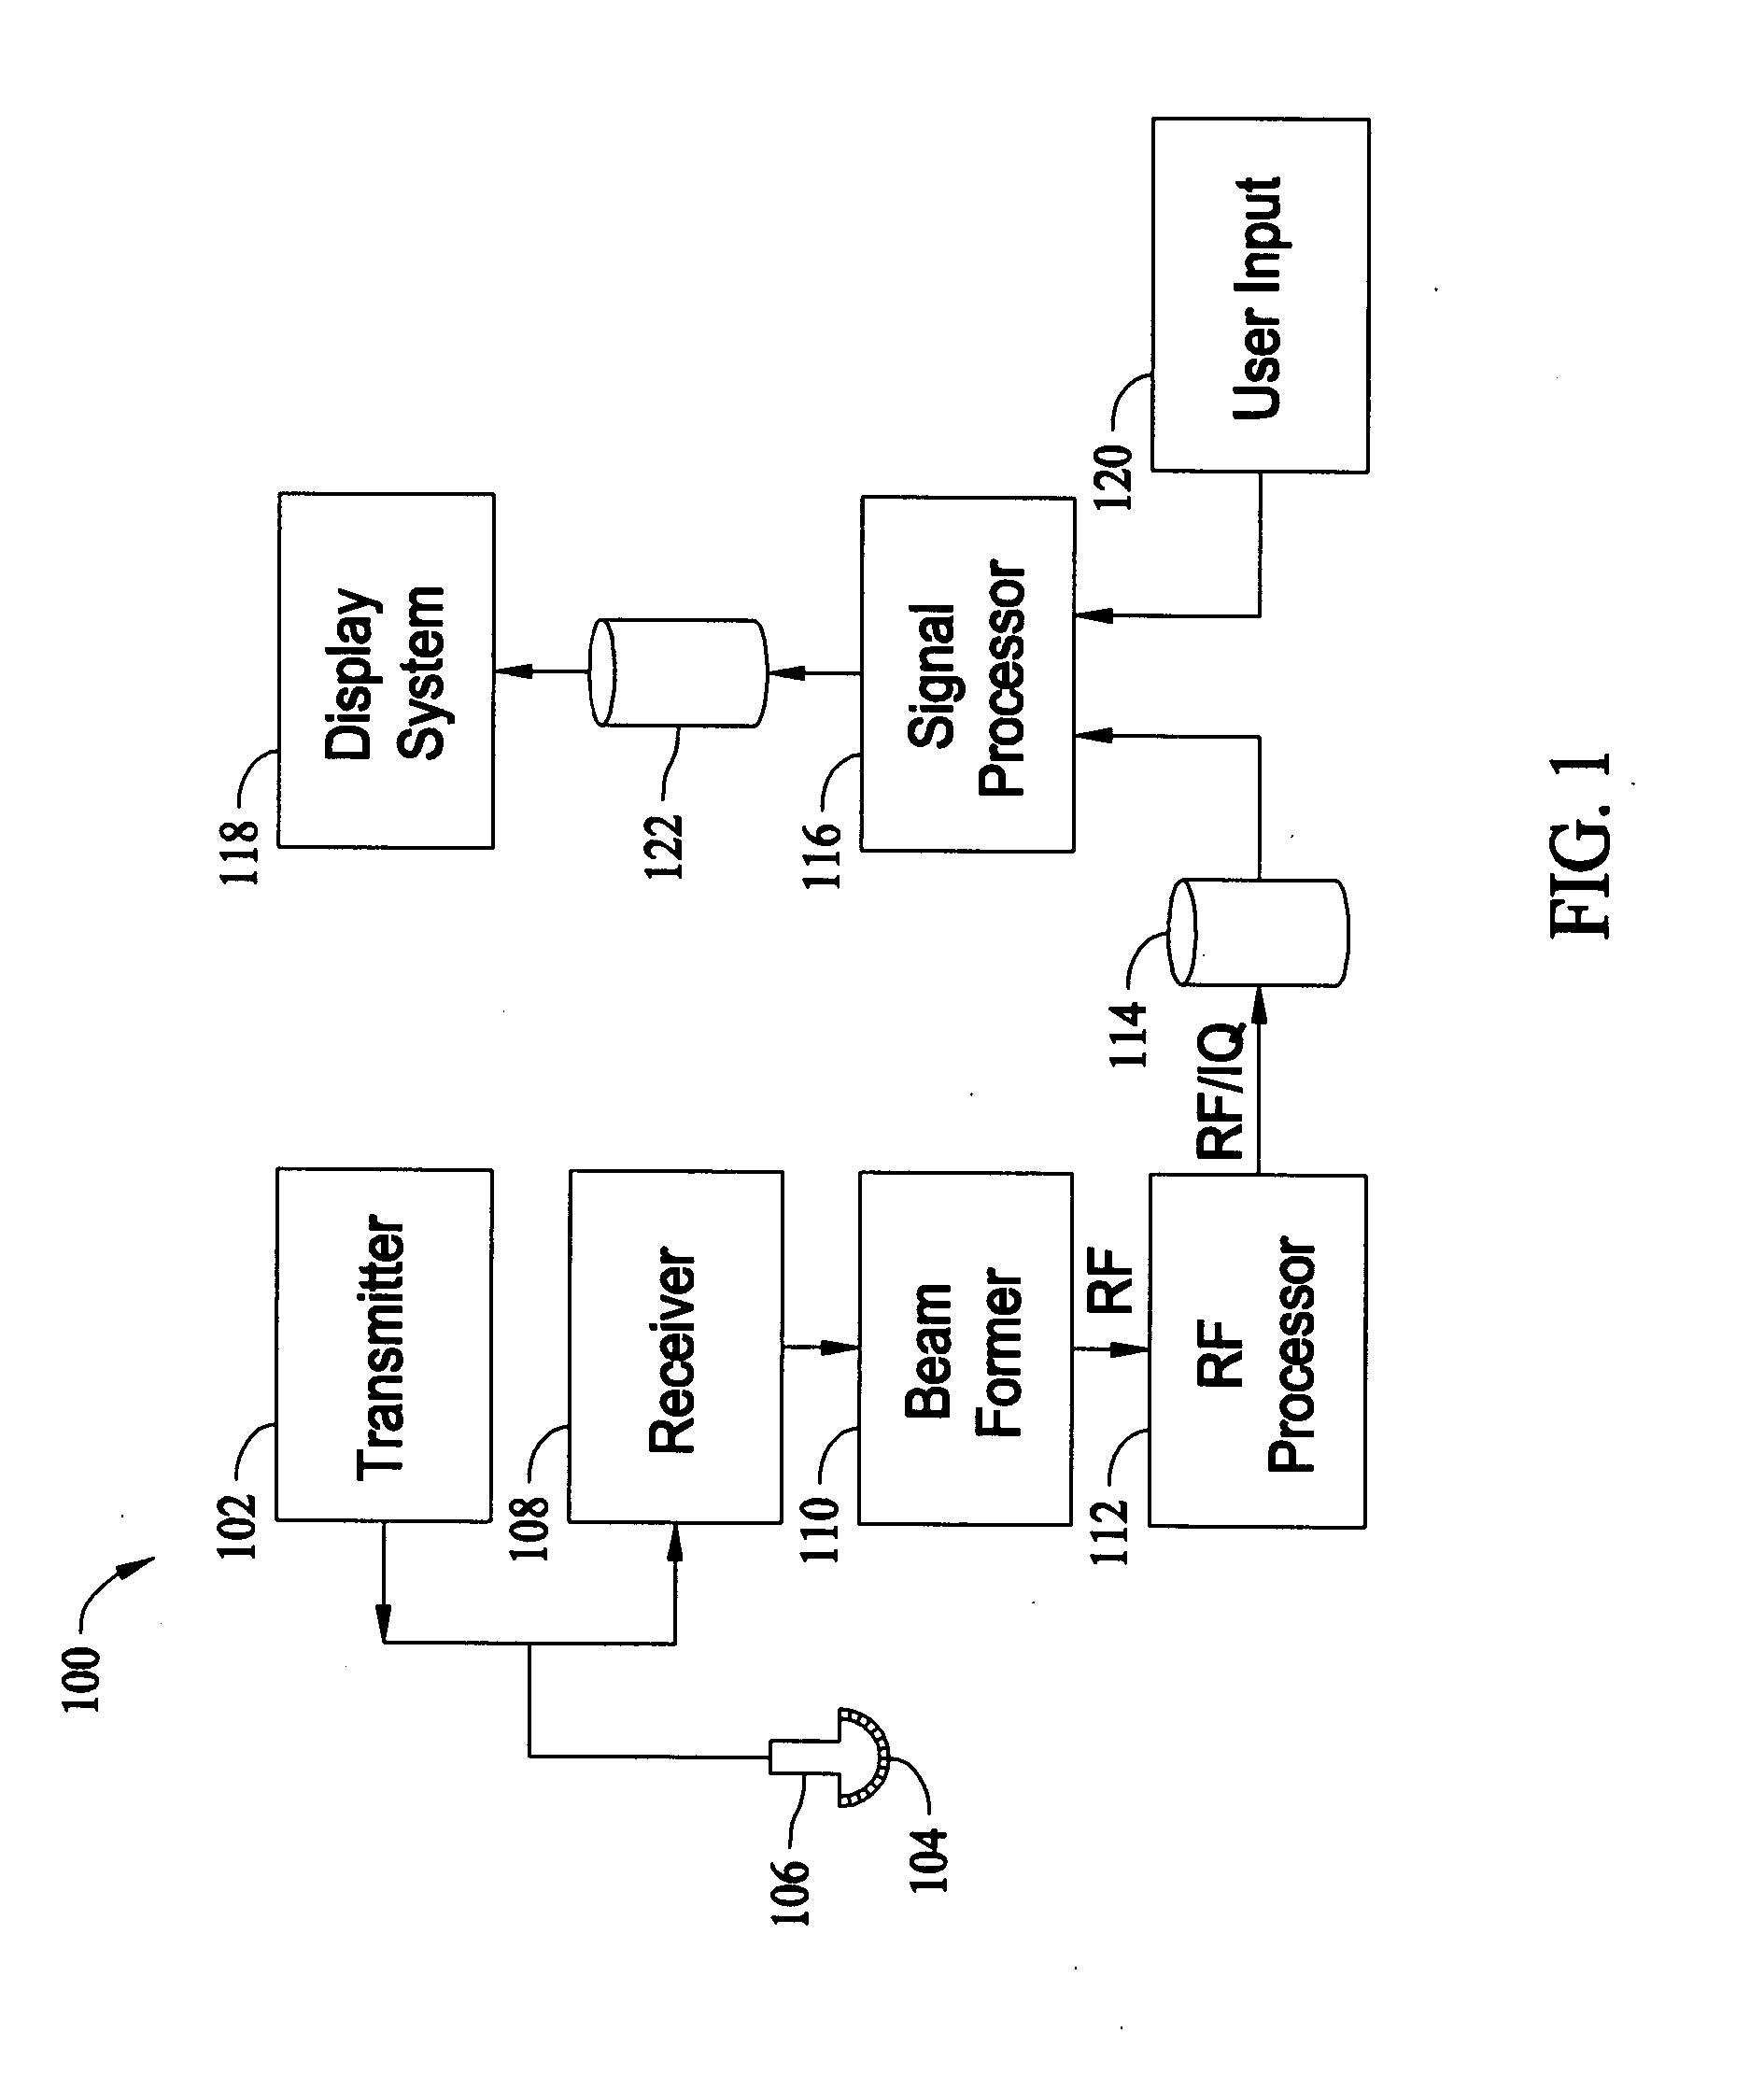 System and method for controlling ultrasound probe having multiple transducer arrays